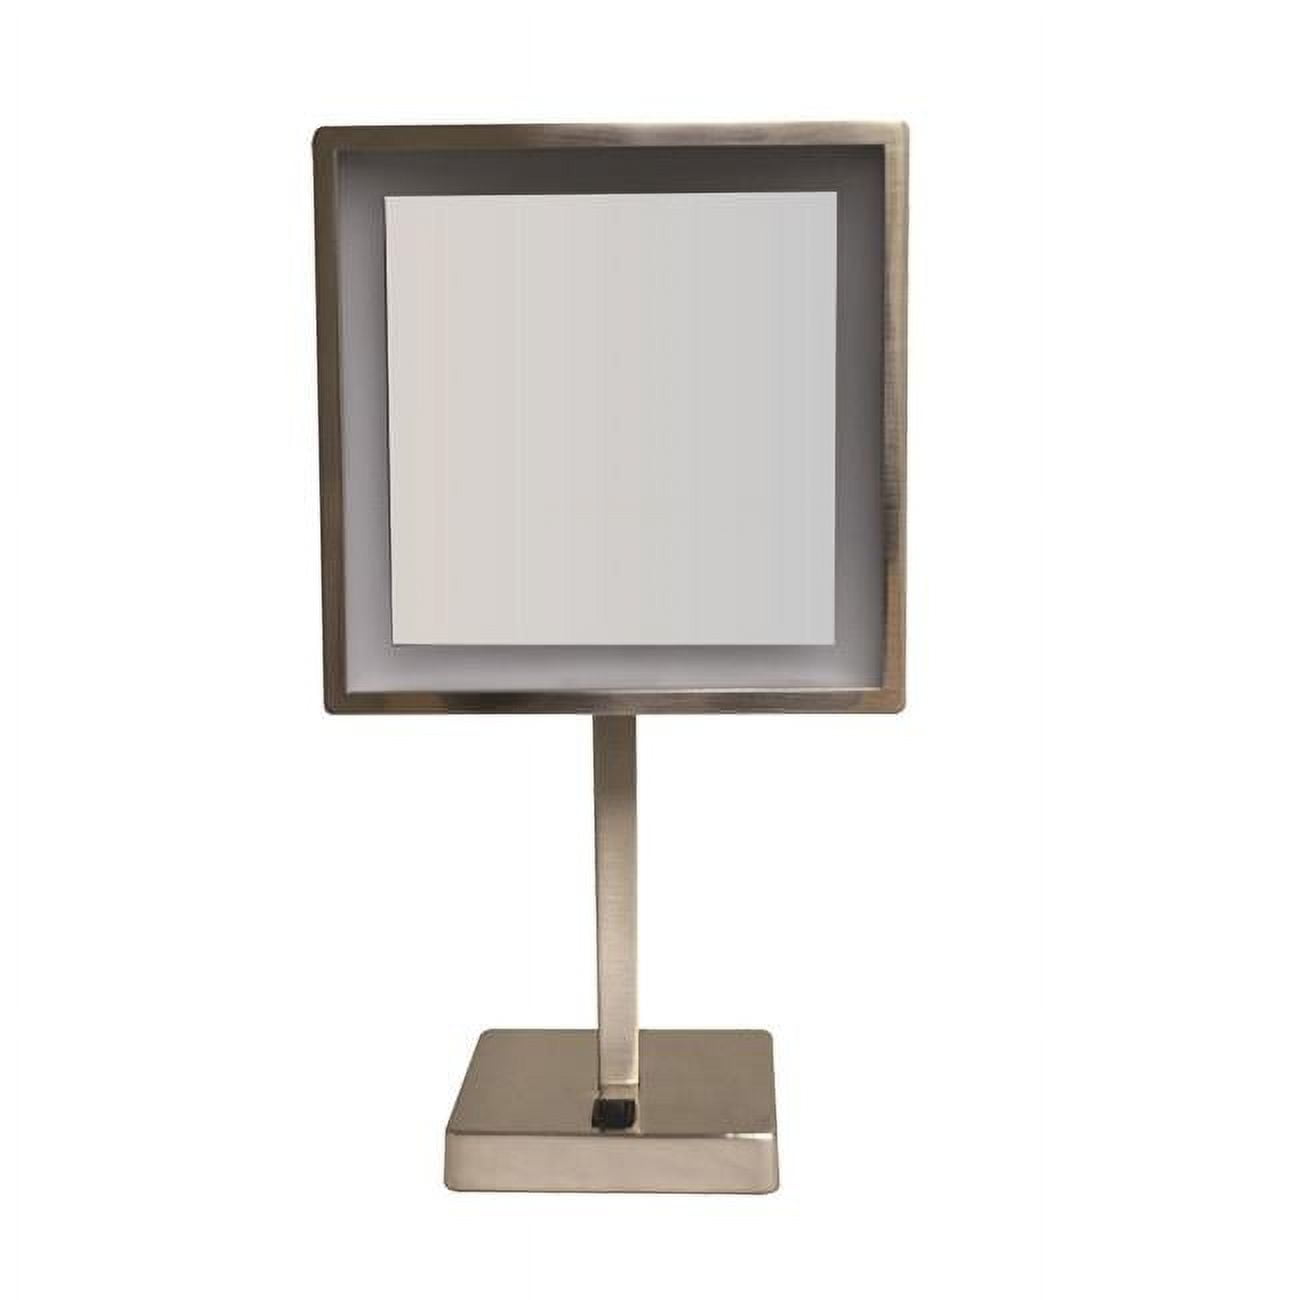 Whmr295-bn Square Freestanding Led 5x Magnified Mirror - Brushed Nickel